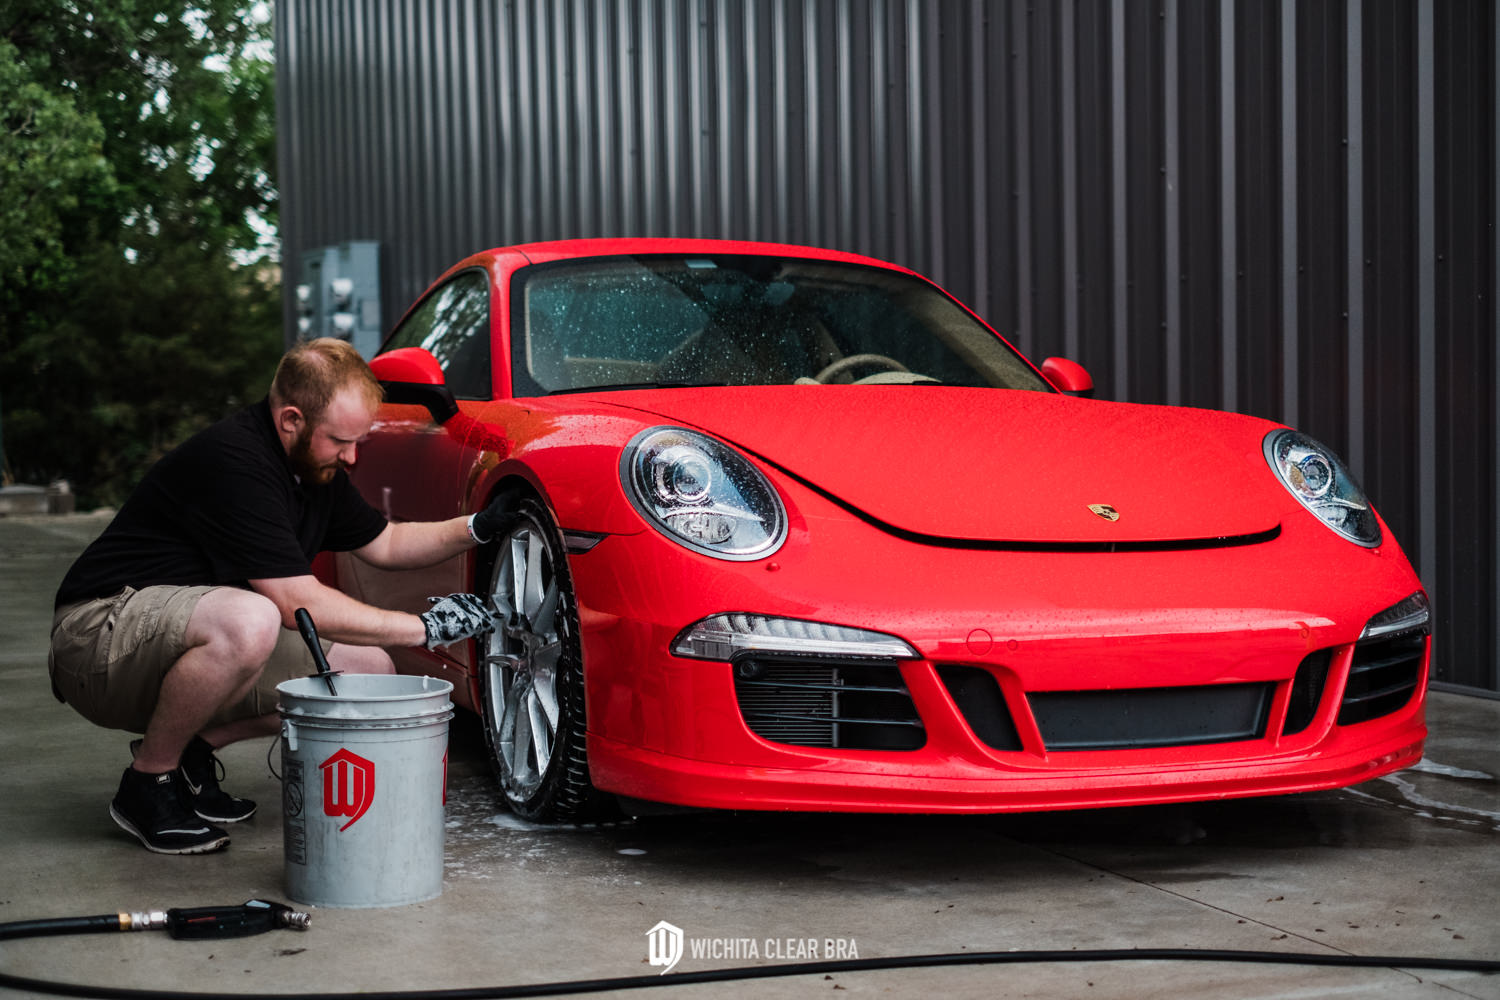 Wichita Clear Bra - Porsche 911 - Forgeline Wheels CF201 - Carbon + Forged Series - XPEL PPF - Paint Protection - Modified Porsche 911 -  Ceramic Pro Coating-104.jpg